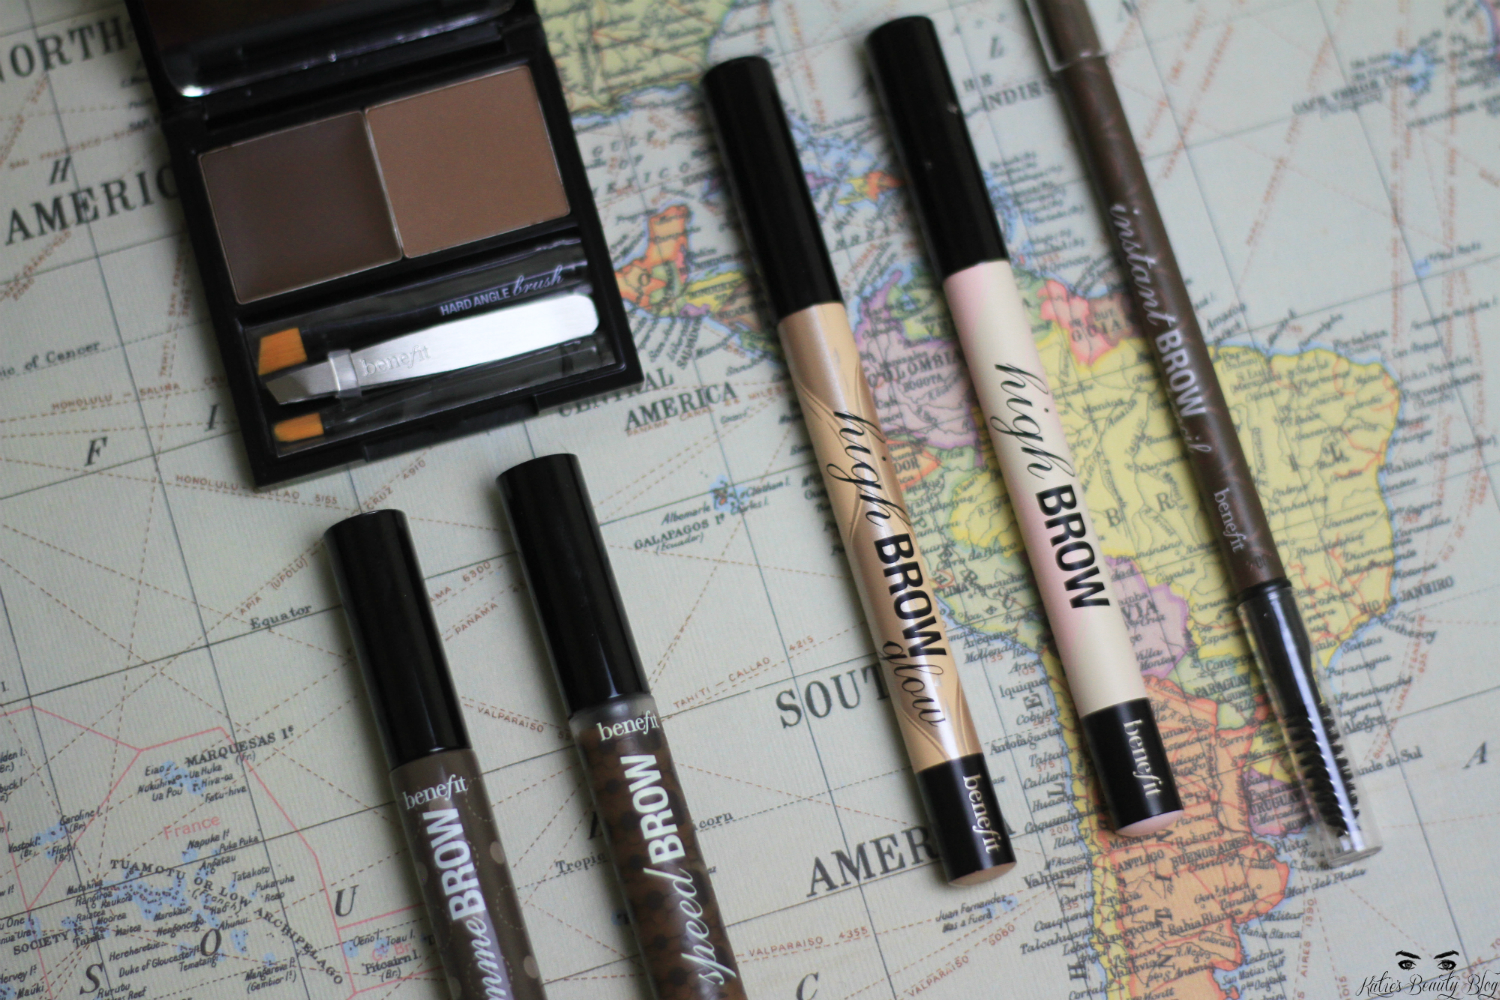 REVIEW: Benefit Brow Product Reviews!